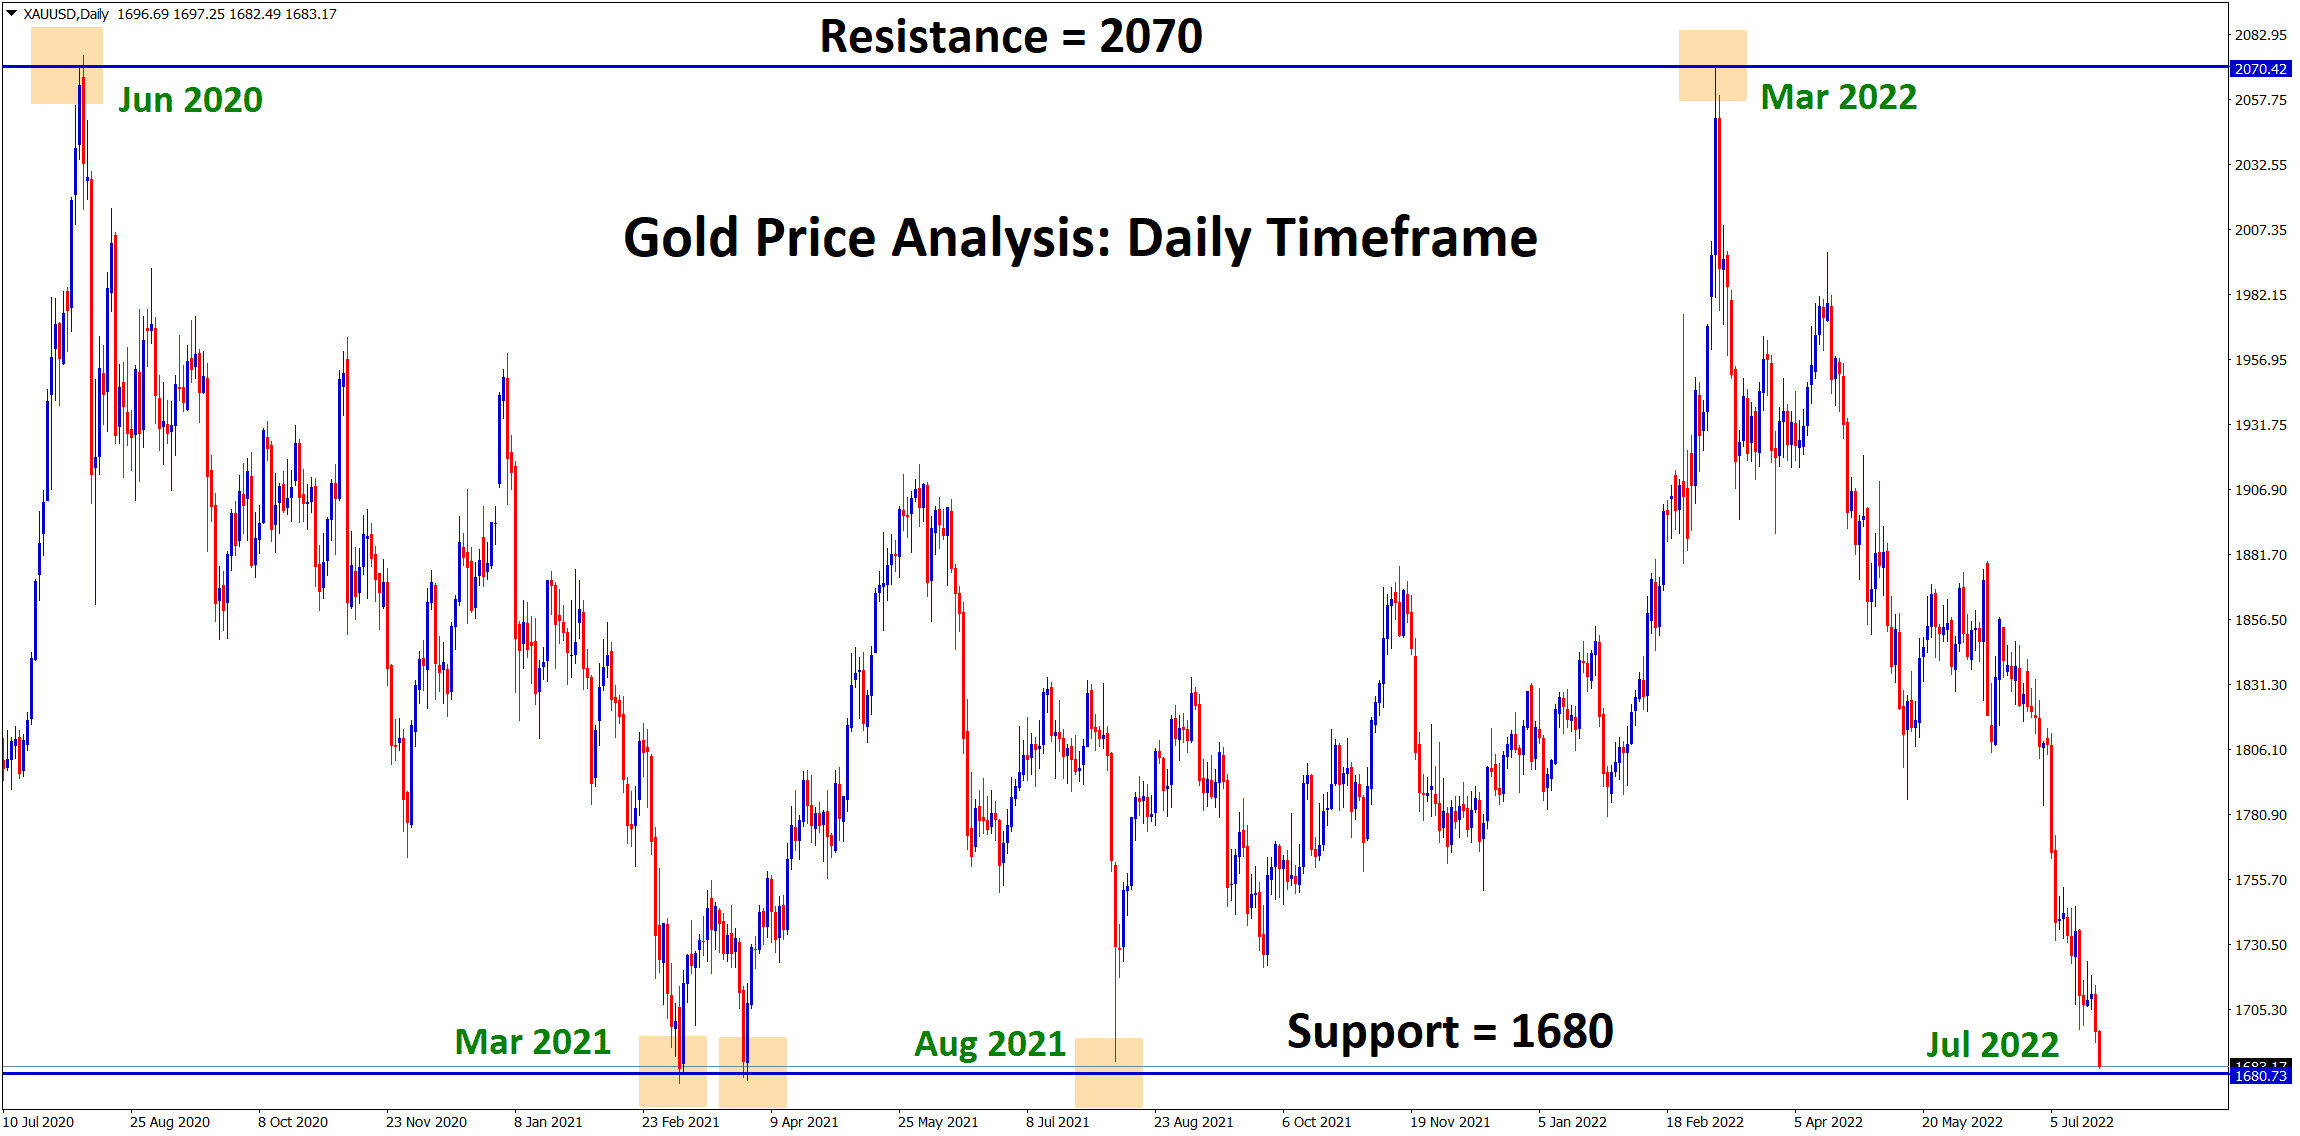 Gold price has reached the important support area